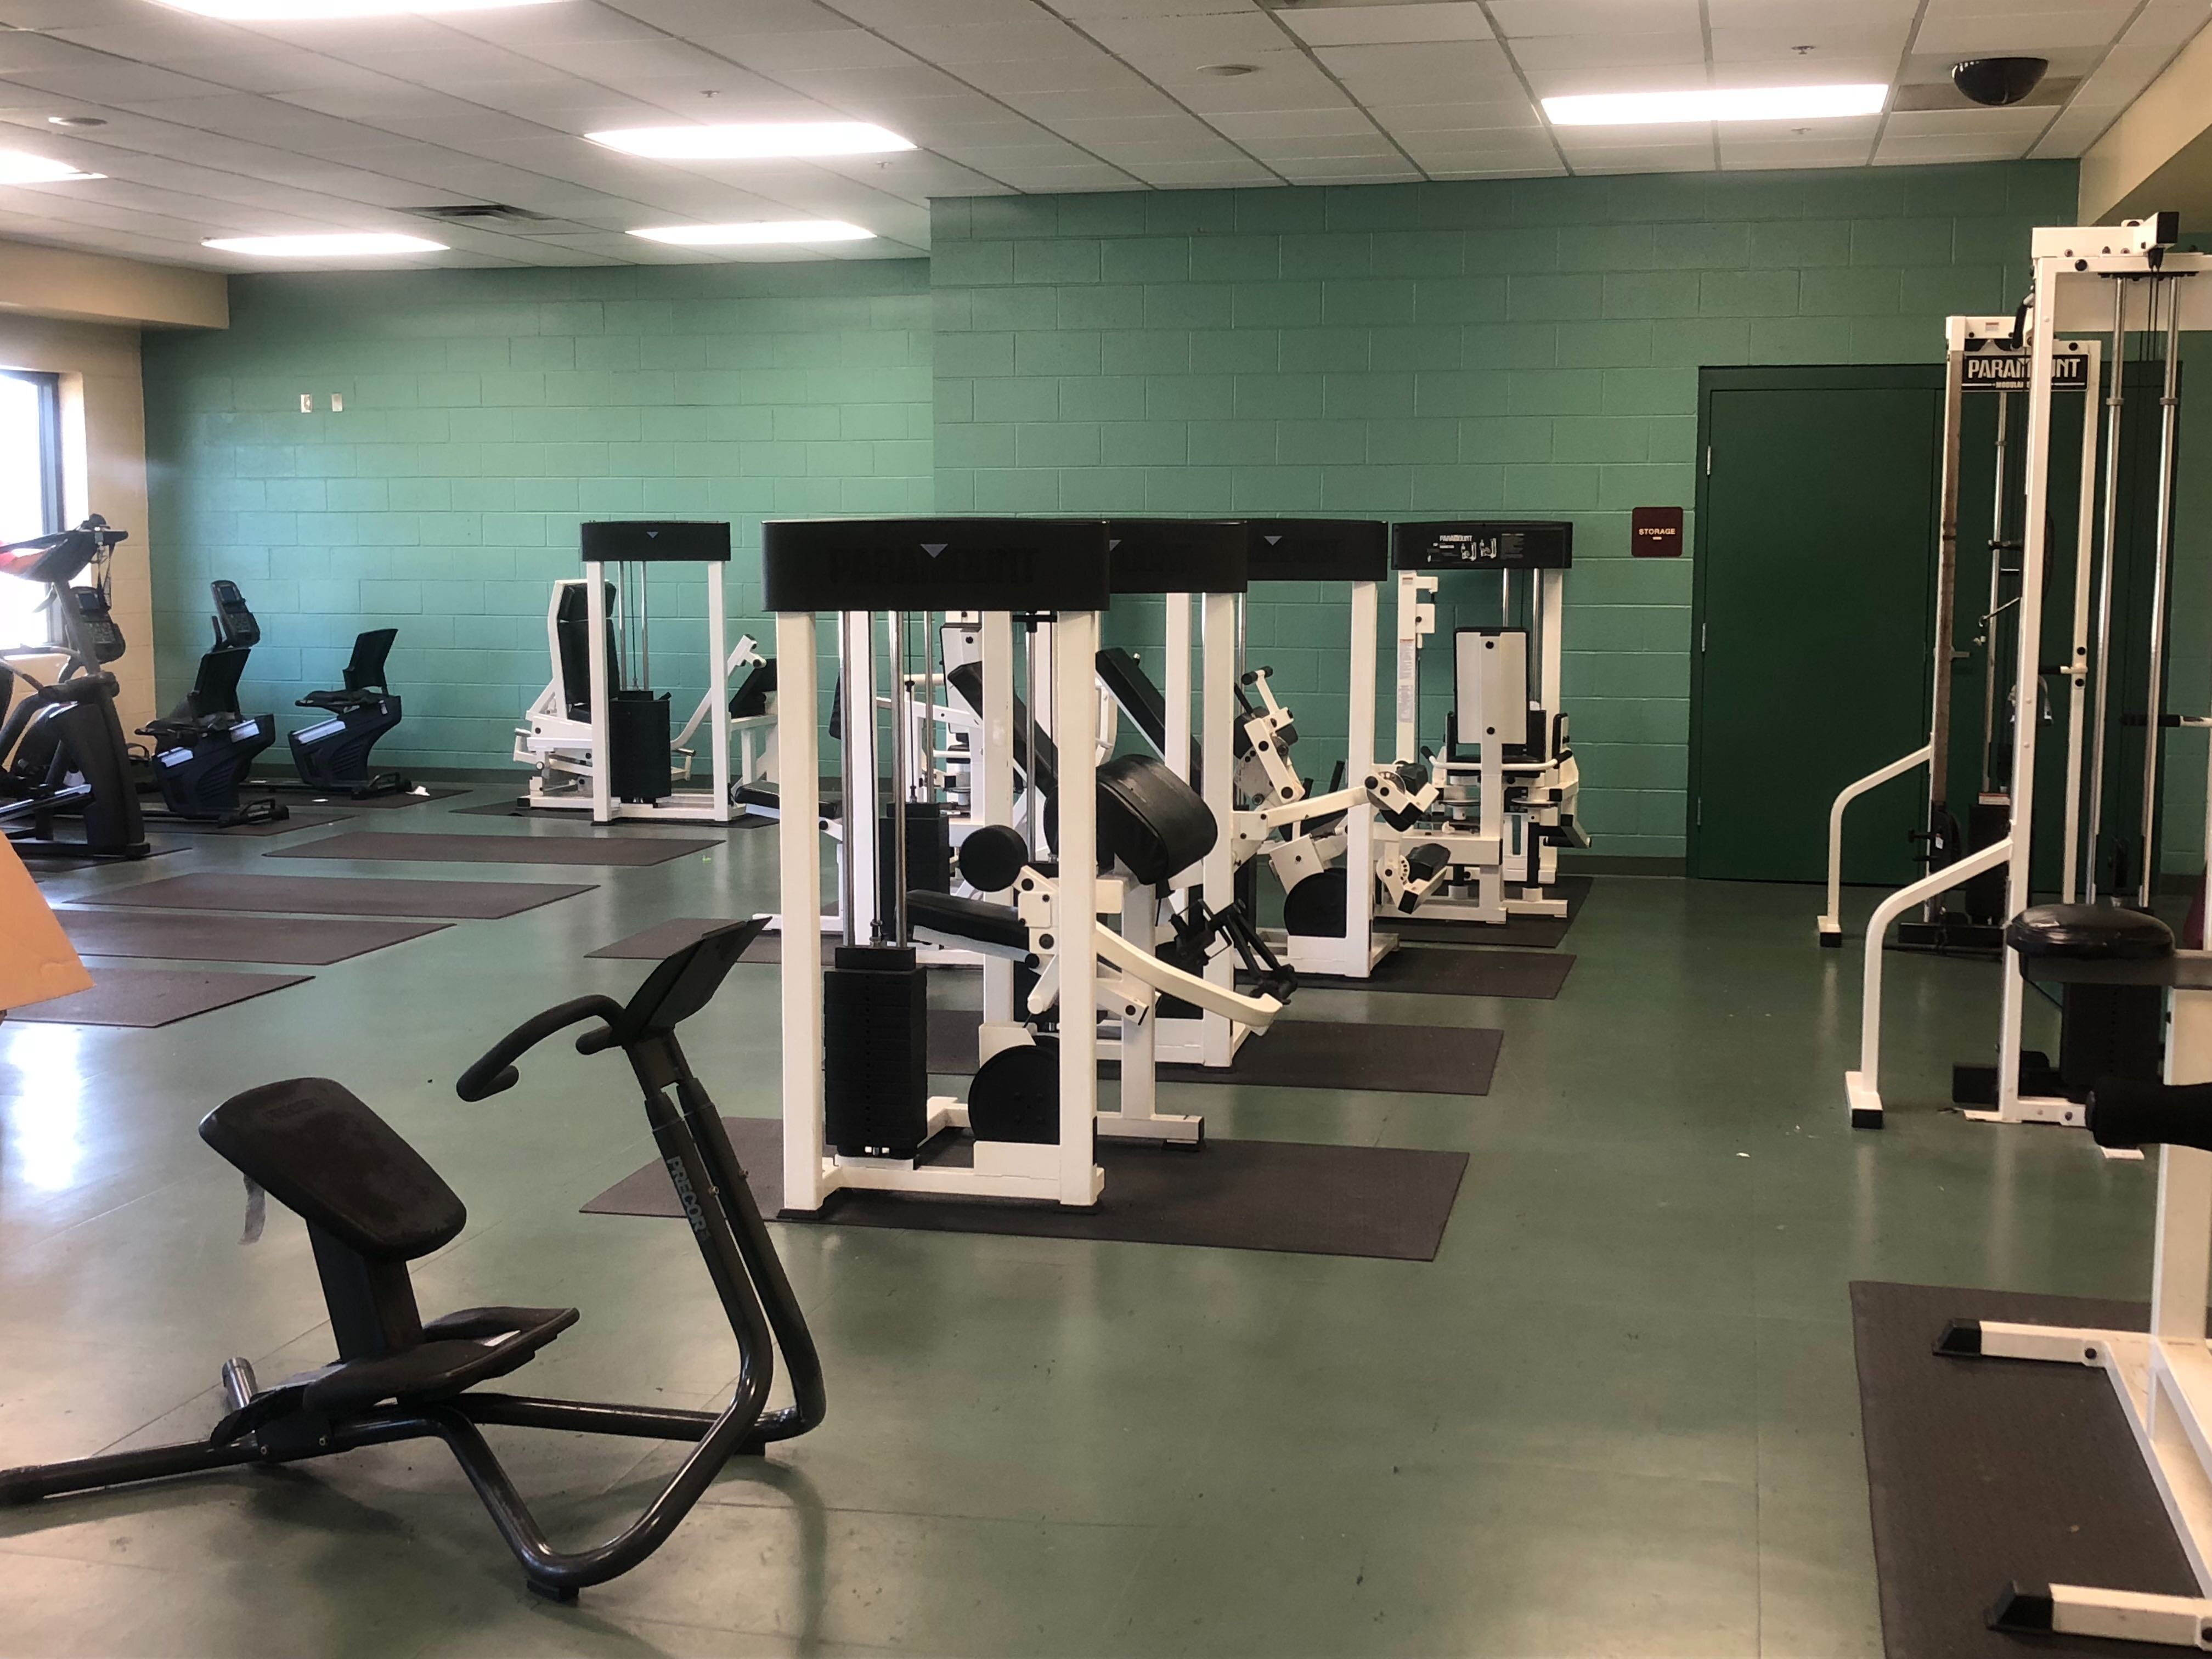 The Hickory Hill Community Center has a number of specialized amenities, including its indoor pool and workout room. (A.J. Dugger III)